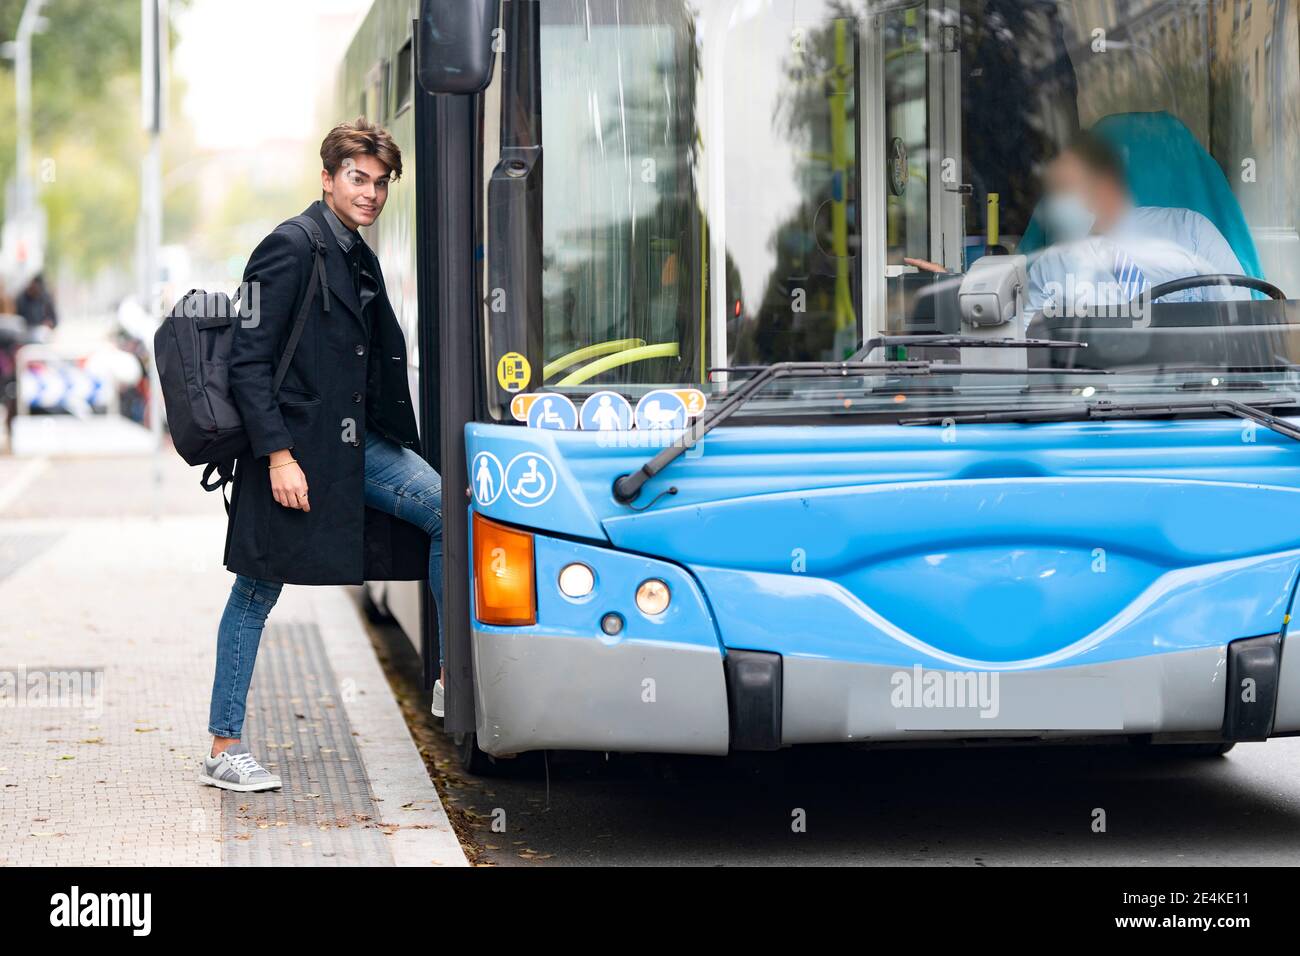 Smiling handsome young man with backpack boarding bus in city Stock Photo